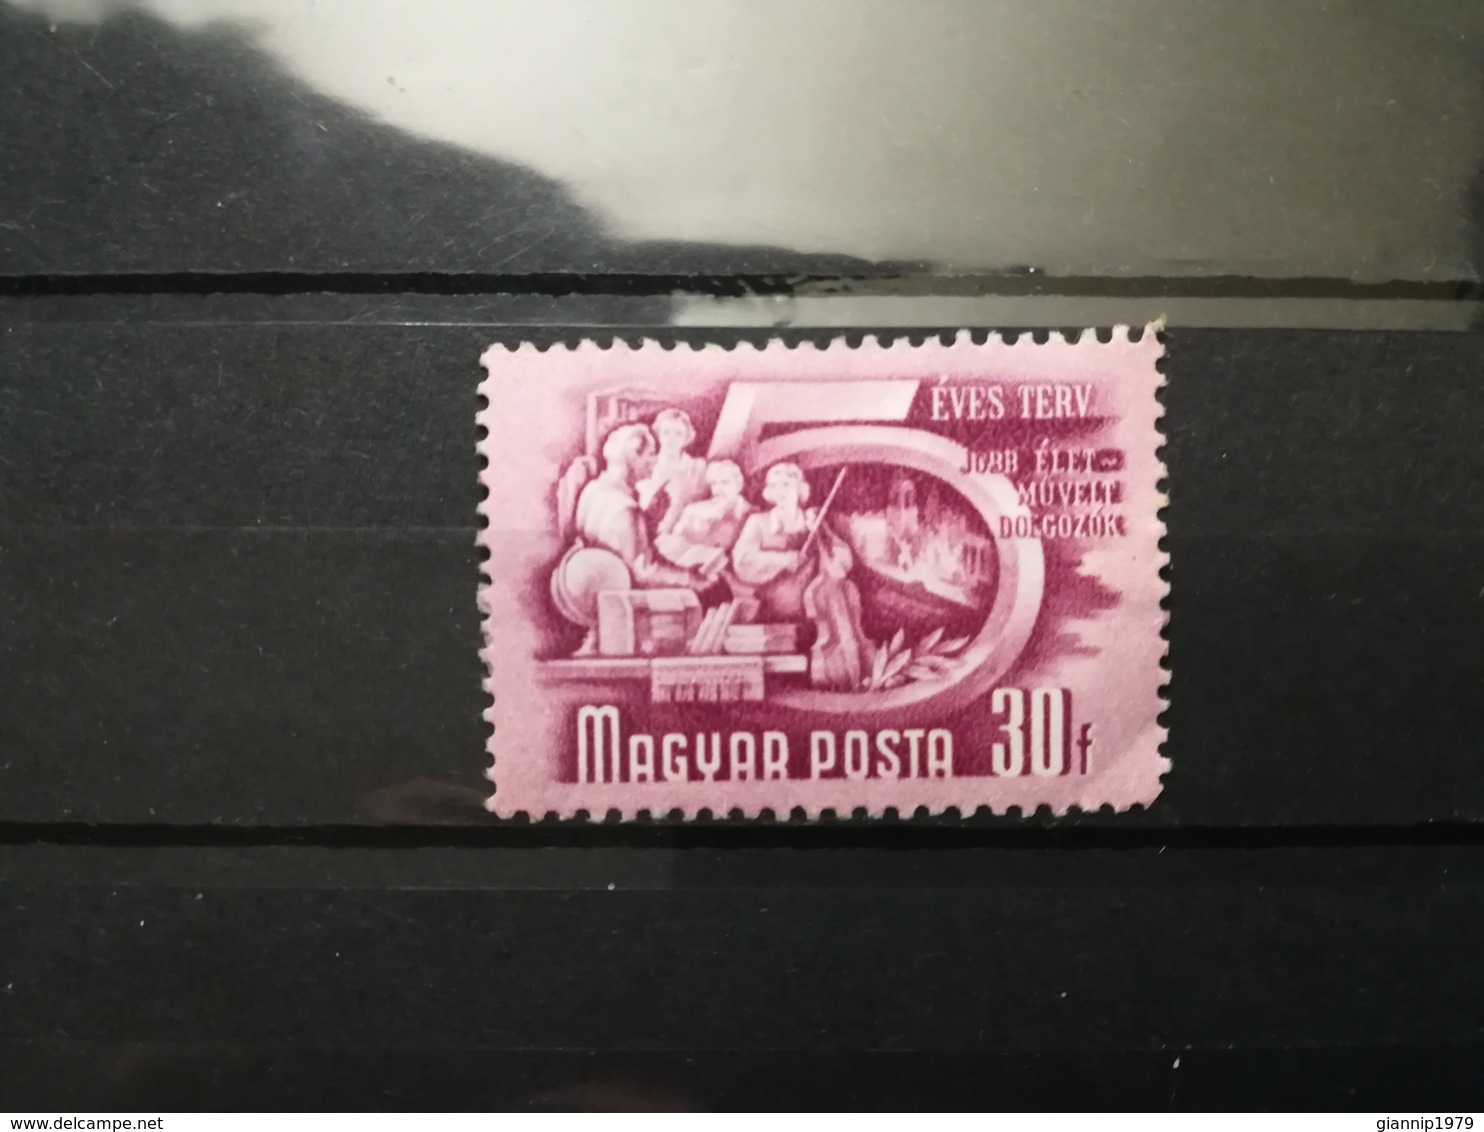 FRANCOBOLLI STAMPS UNGHERIA MAGYAR POSTA 1950 USED PLAN FIVE PIANO QUINQUENNALE HUNGARY - Gebraucht